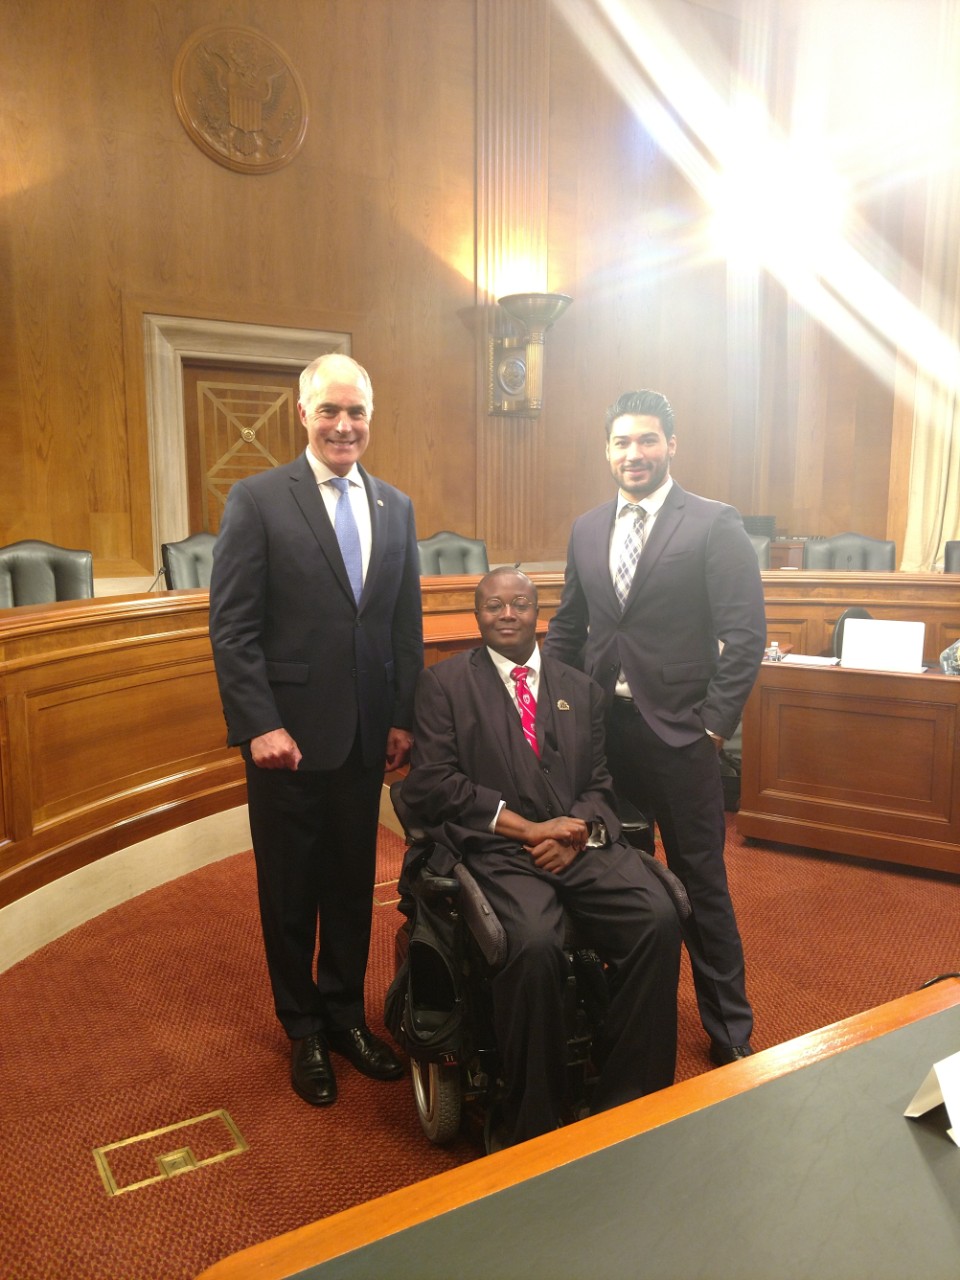 There are three men posing in a federal government meeting room in Washington, DC. They are Senator Bob Casey, Christopher J. Rodriguez, Director of Public Policy, and Edward Mitchell, the subject of the article. All three men are wearing suits and ties, and Edward Mitchell is sitting in a power wheelchair.